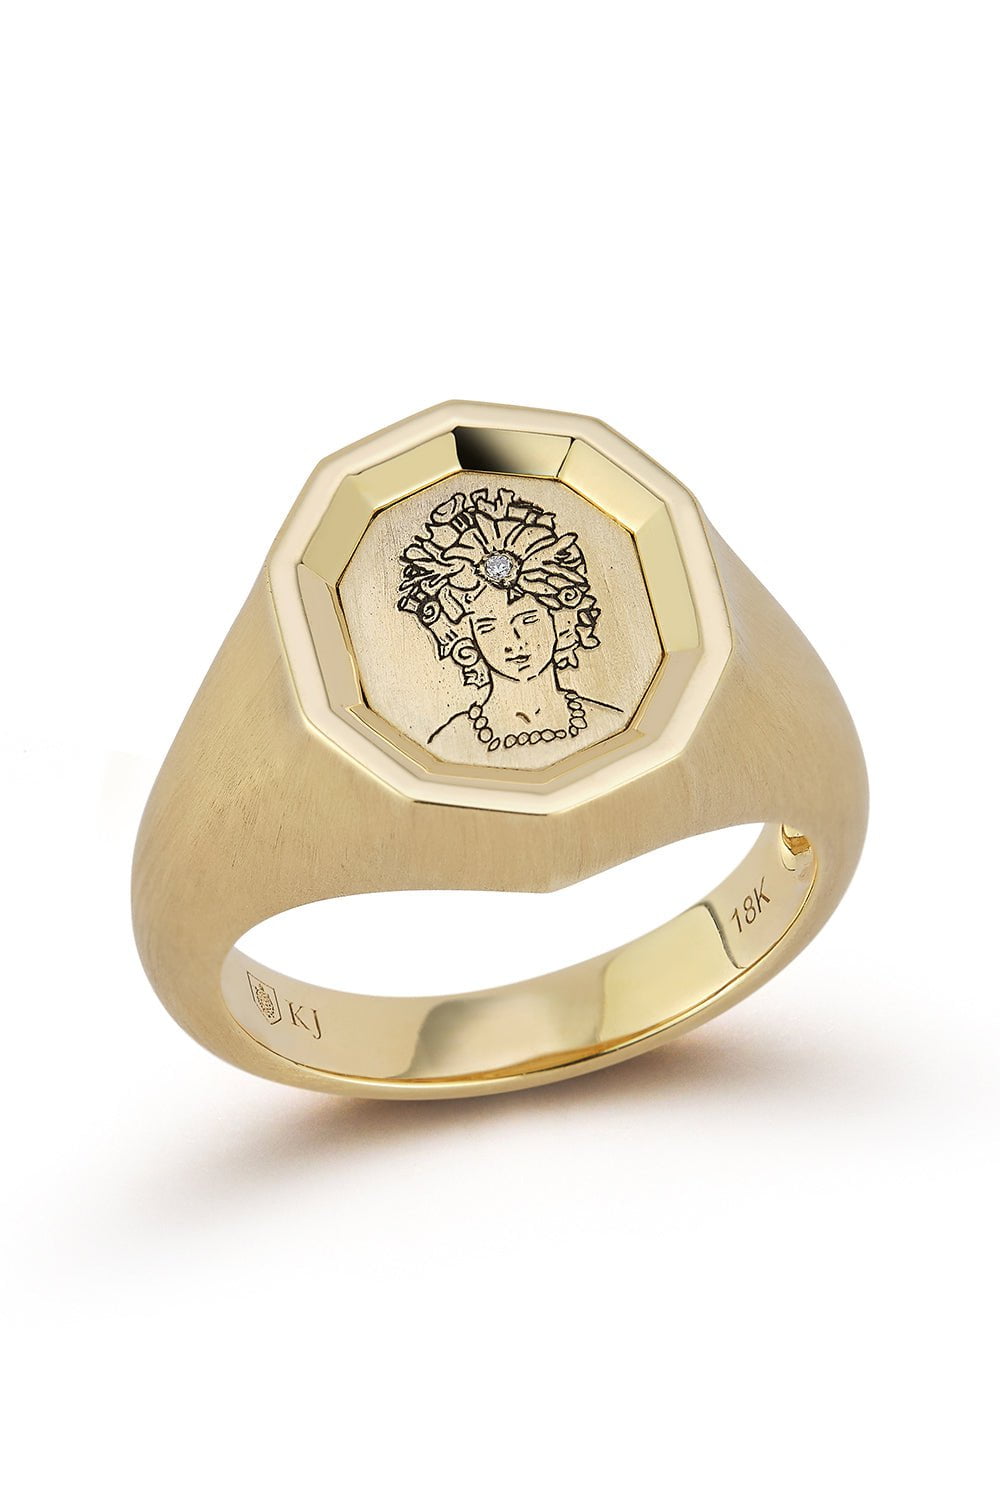 KATHERINE JETTER-The Siren Of The Sea Ring-YELLOW GOLD